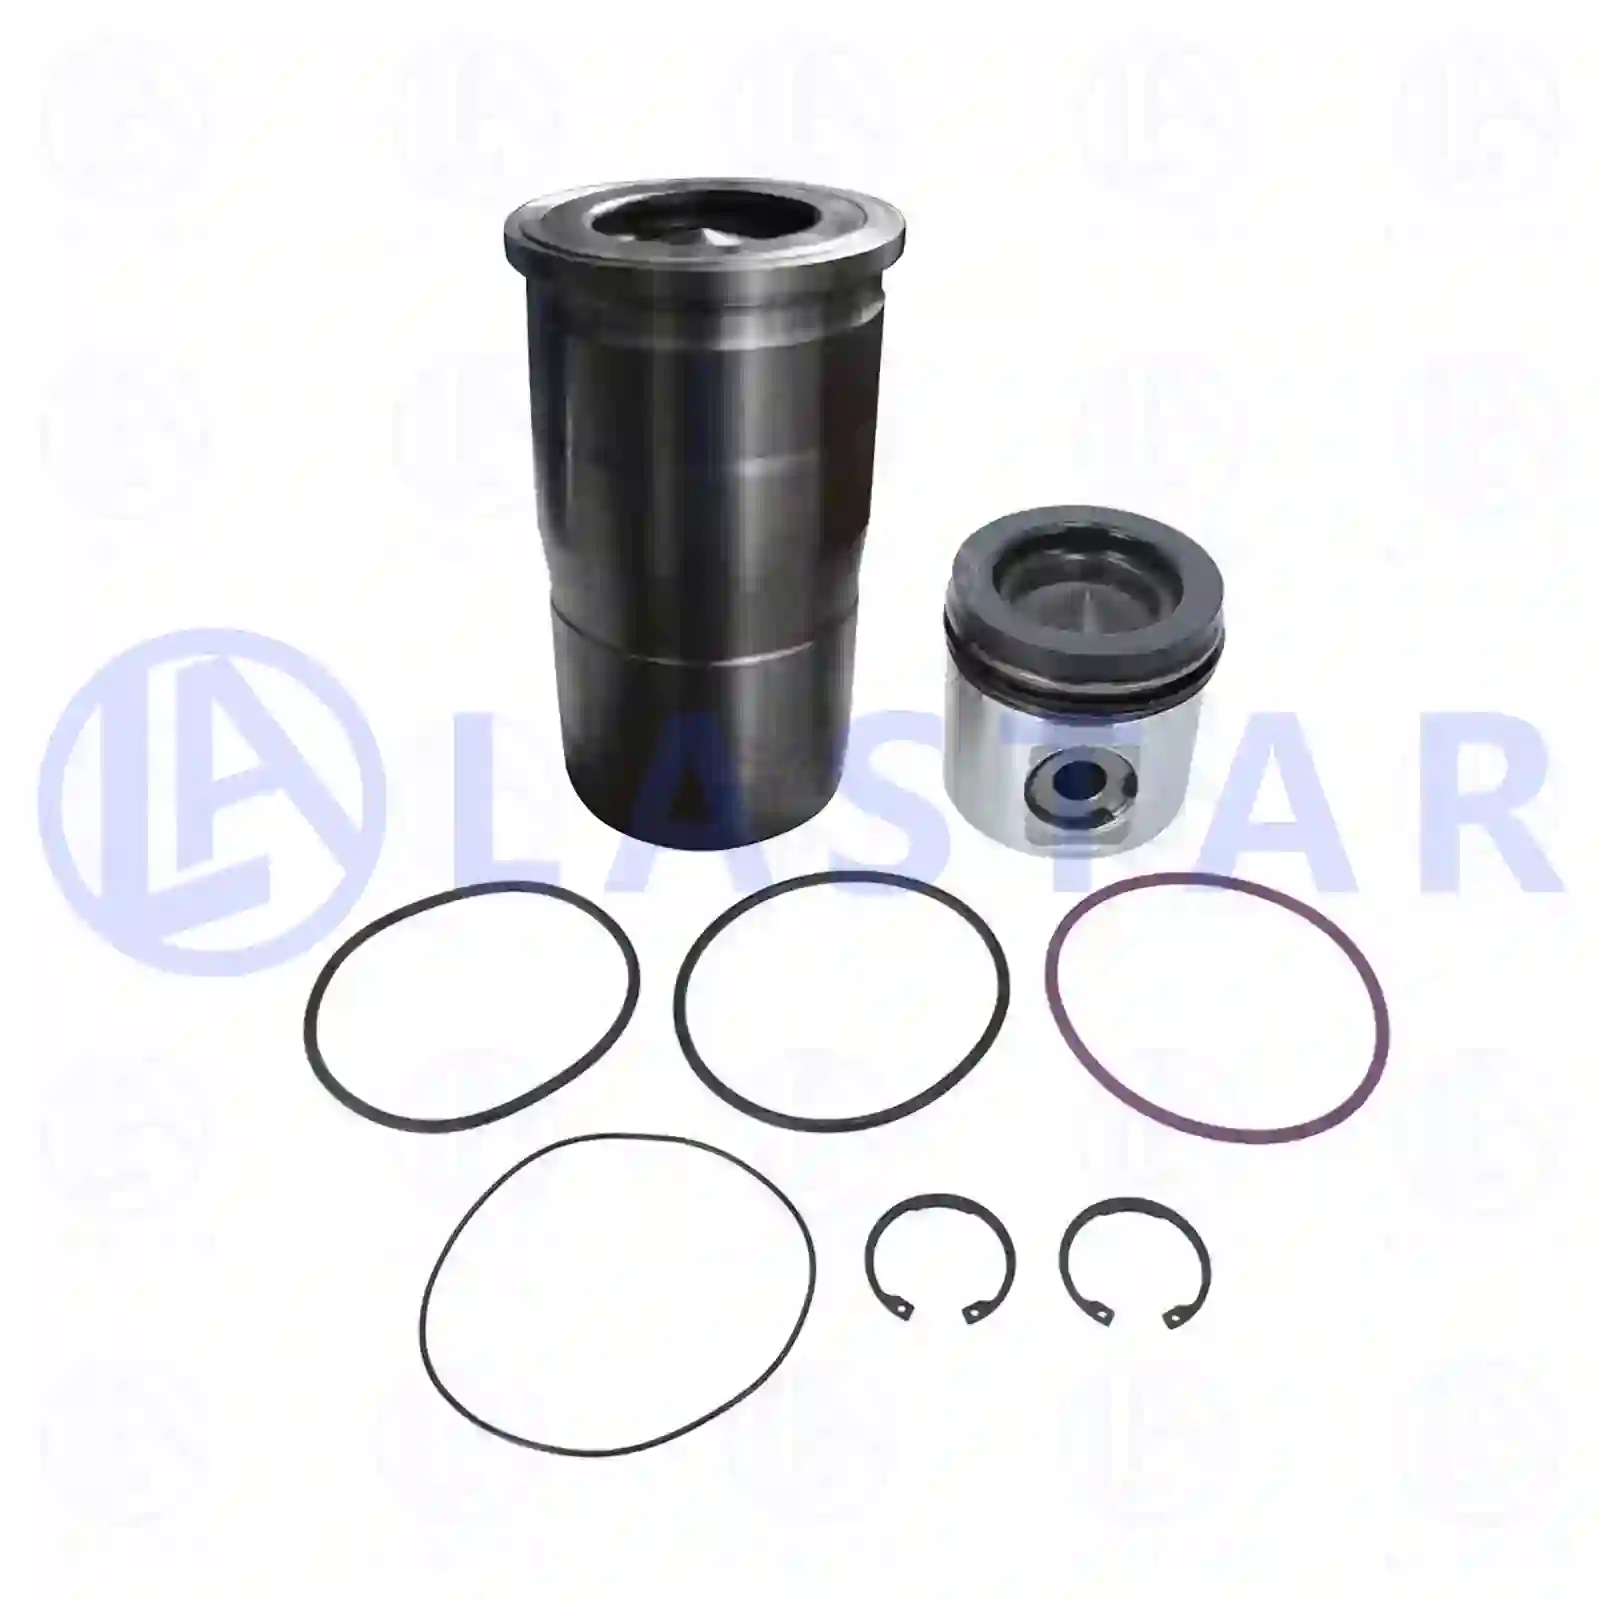 Piston with liner, 77704251, 20521949, 8510145 ||  77704251 Lastar Spare Part | Truck Spare Parts, Auotomotive Spare Parts Piston with liner, 77704251, 20521949, 8510145 ||  77704251 Lastar Spare Part | Truck Spare Parts, Auotomotive Spare Parts